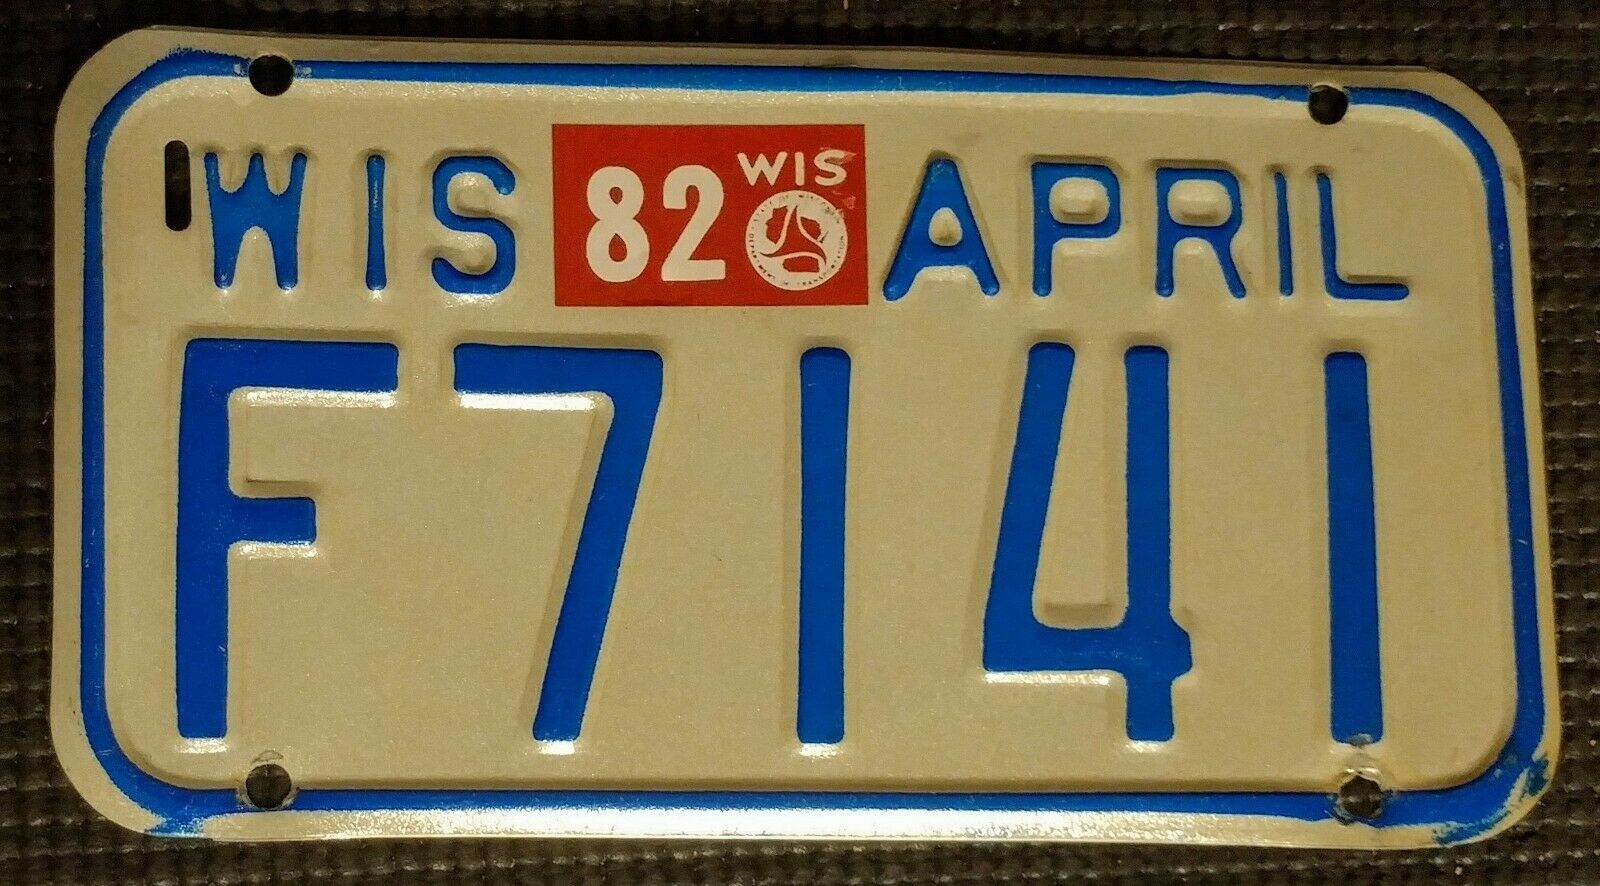 1981 Vintage Wisconsin Motorcycle License Plate F7141 Blue / White - 82 Sticker